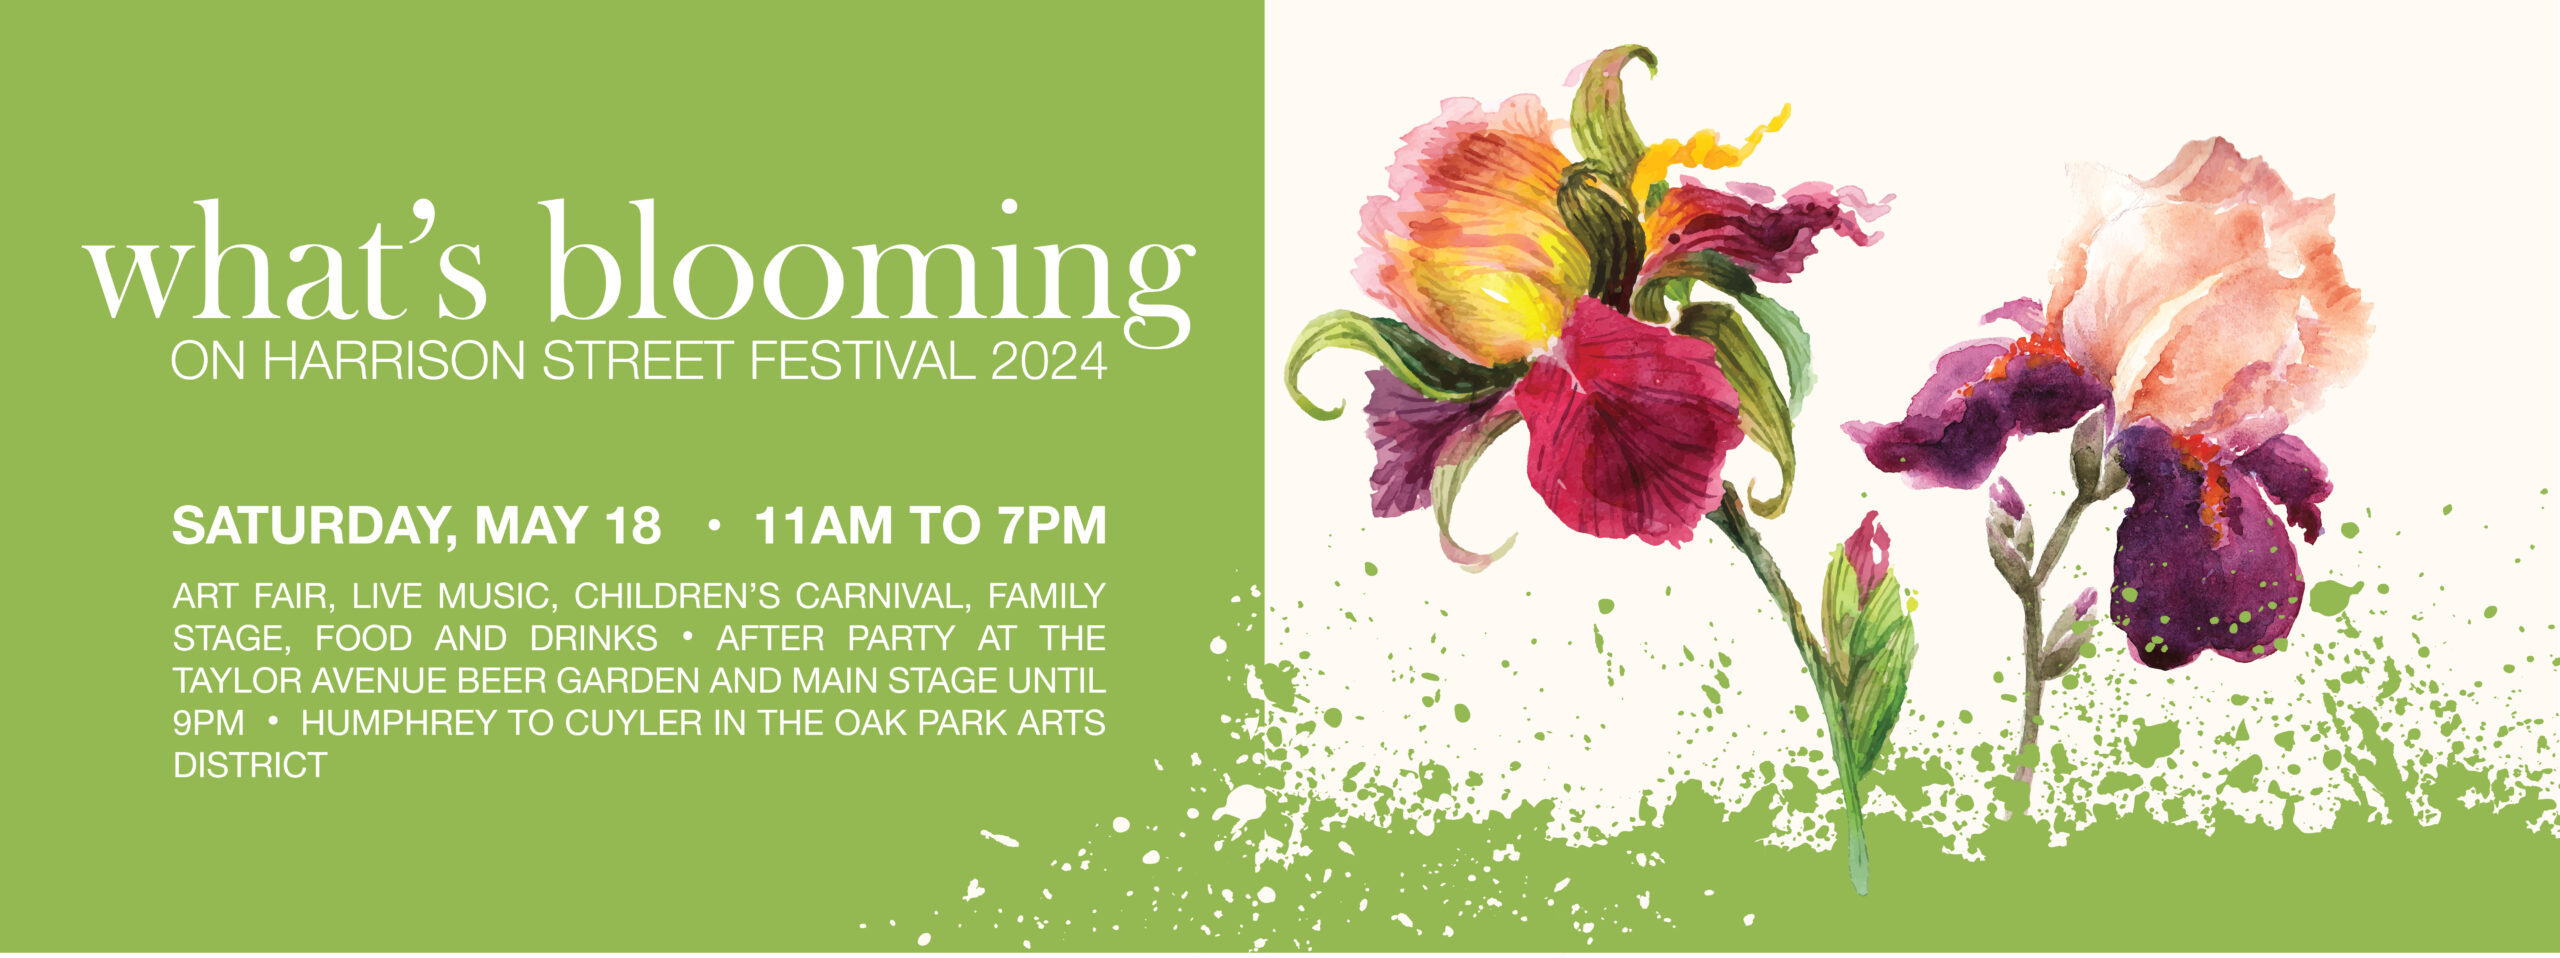 What's Blooming on Harrison Street Festival 2024